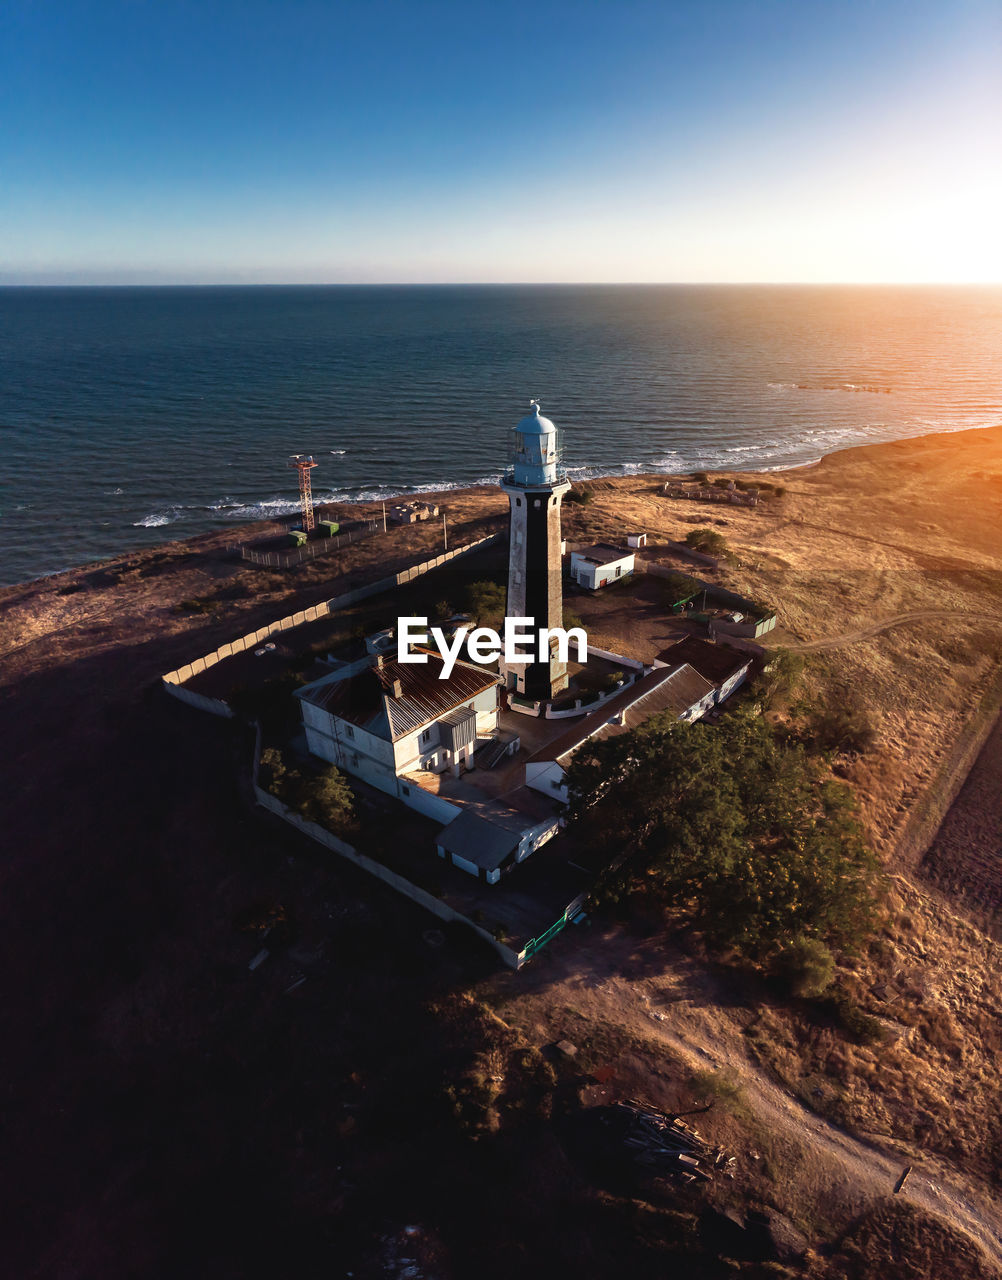 Aerial view of the lighthouse and adjacent technical buildings on the seashore at sunset